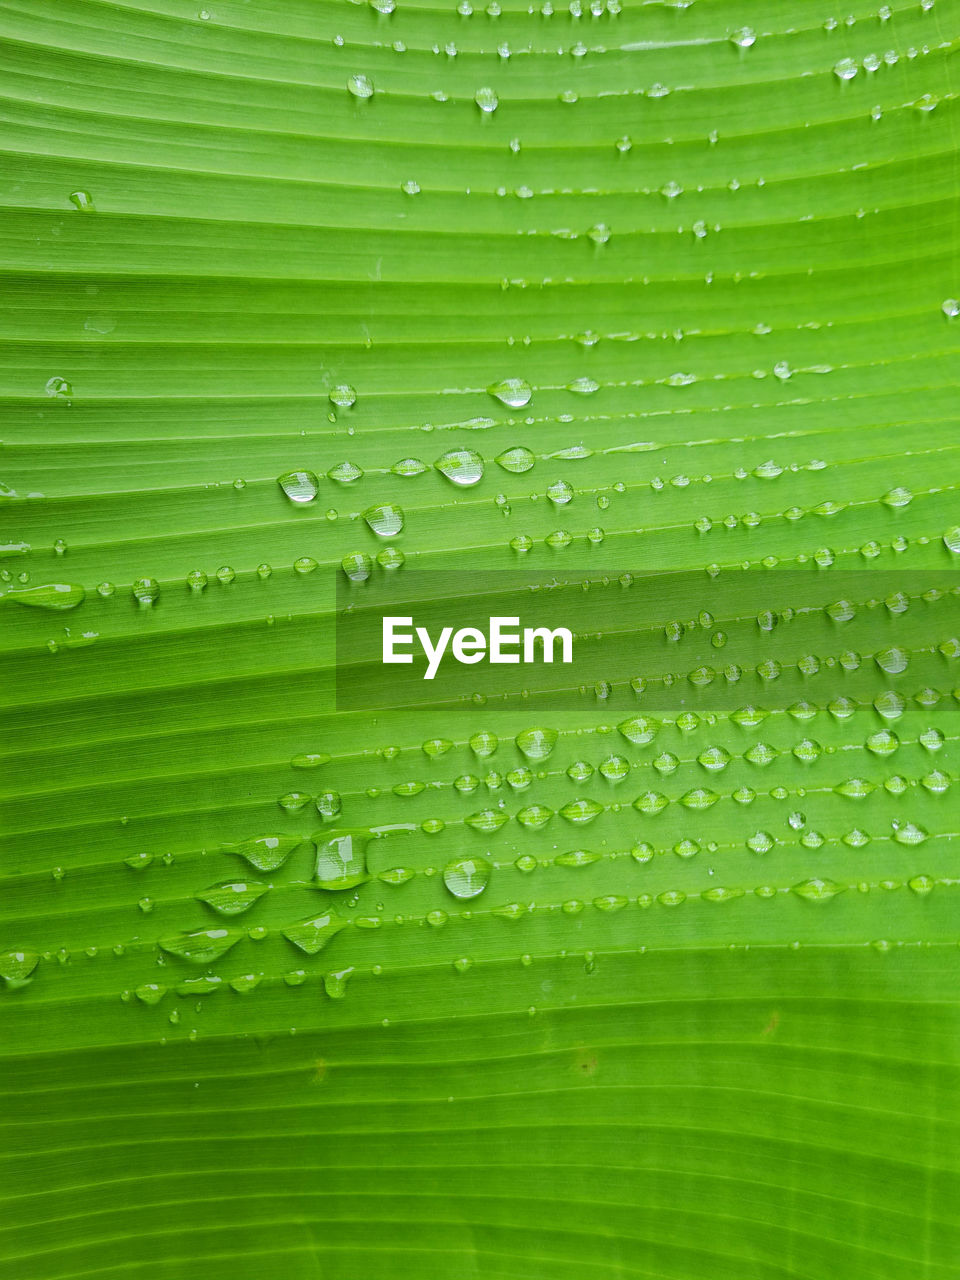 water, green, drop, backgrounds, wet, leaf, close-up, nature, plant part, no people, freshness, full frame, pattern, grass, macro, purity, moisture, beauty in nature, abstract, textured, environment, dew, fragility, rain, circle, extreme close-up, outdoors, plant, vibrant color, macro photography, line, plant stem, growth